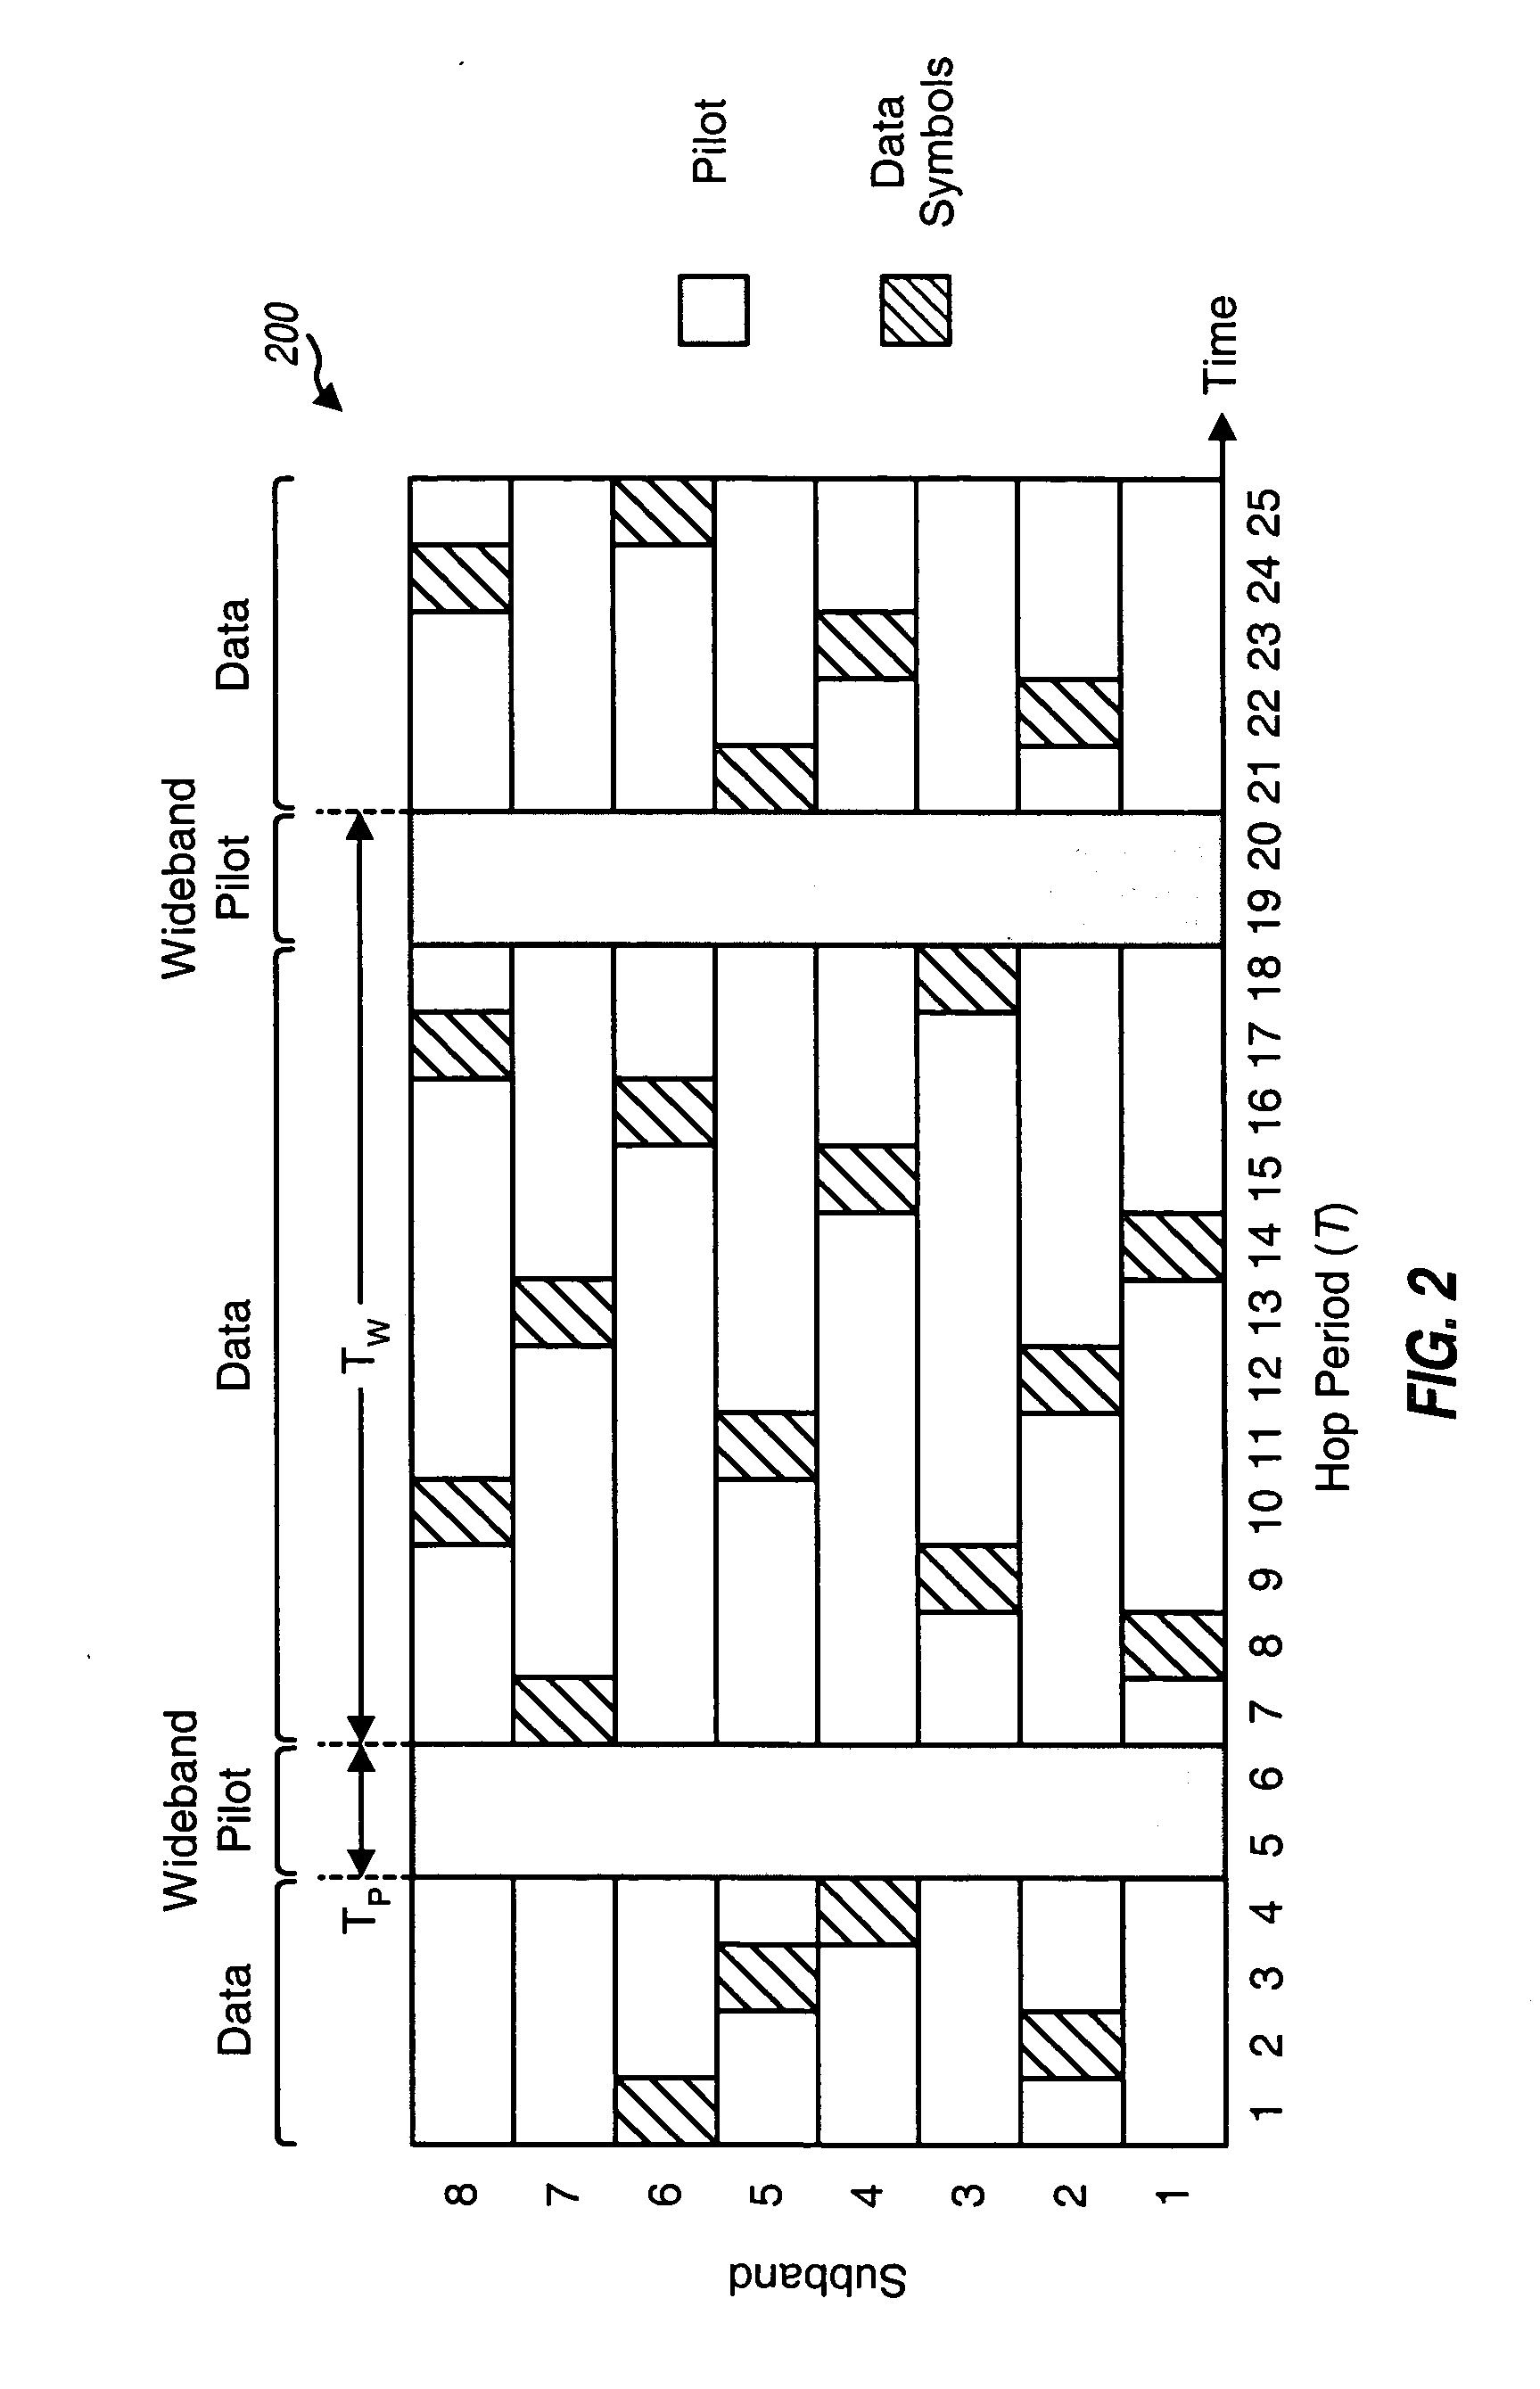 Fast frequency hopping with a code division multiplexed pilot in an OFDMA system